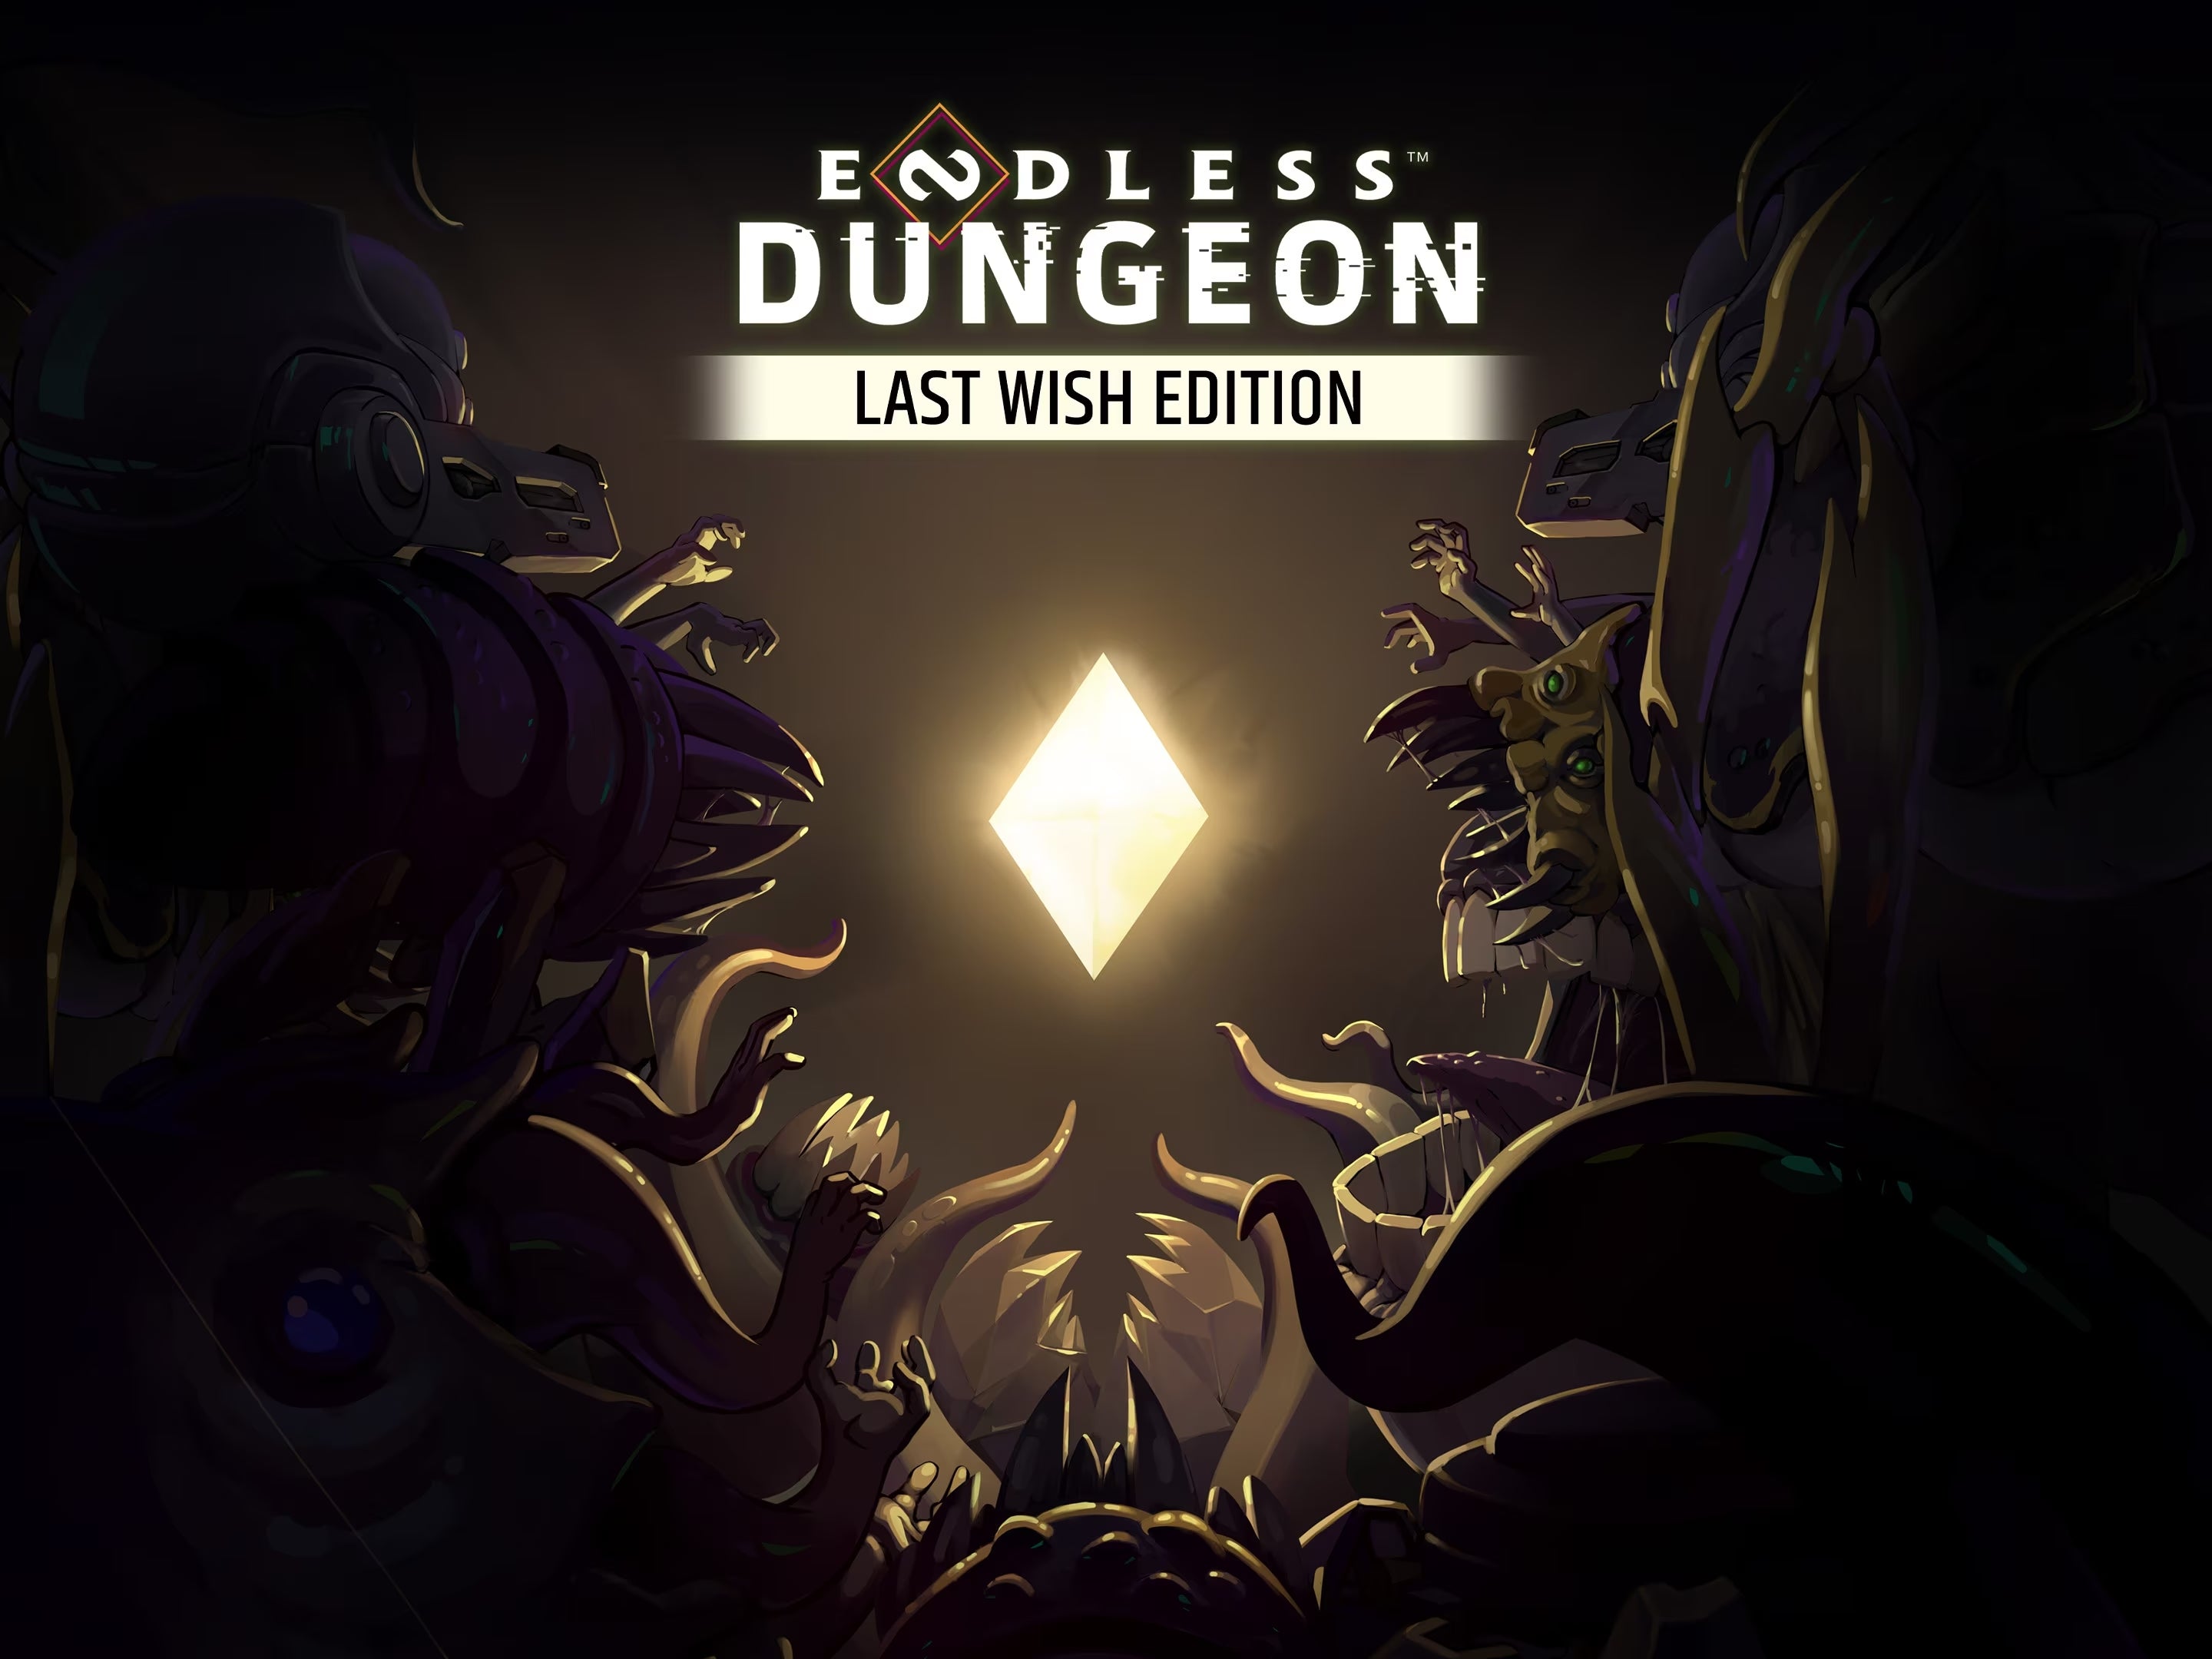 ENDLESS™ Dungeon Last Wish Edition PS4 & PS5